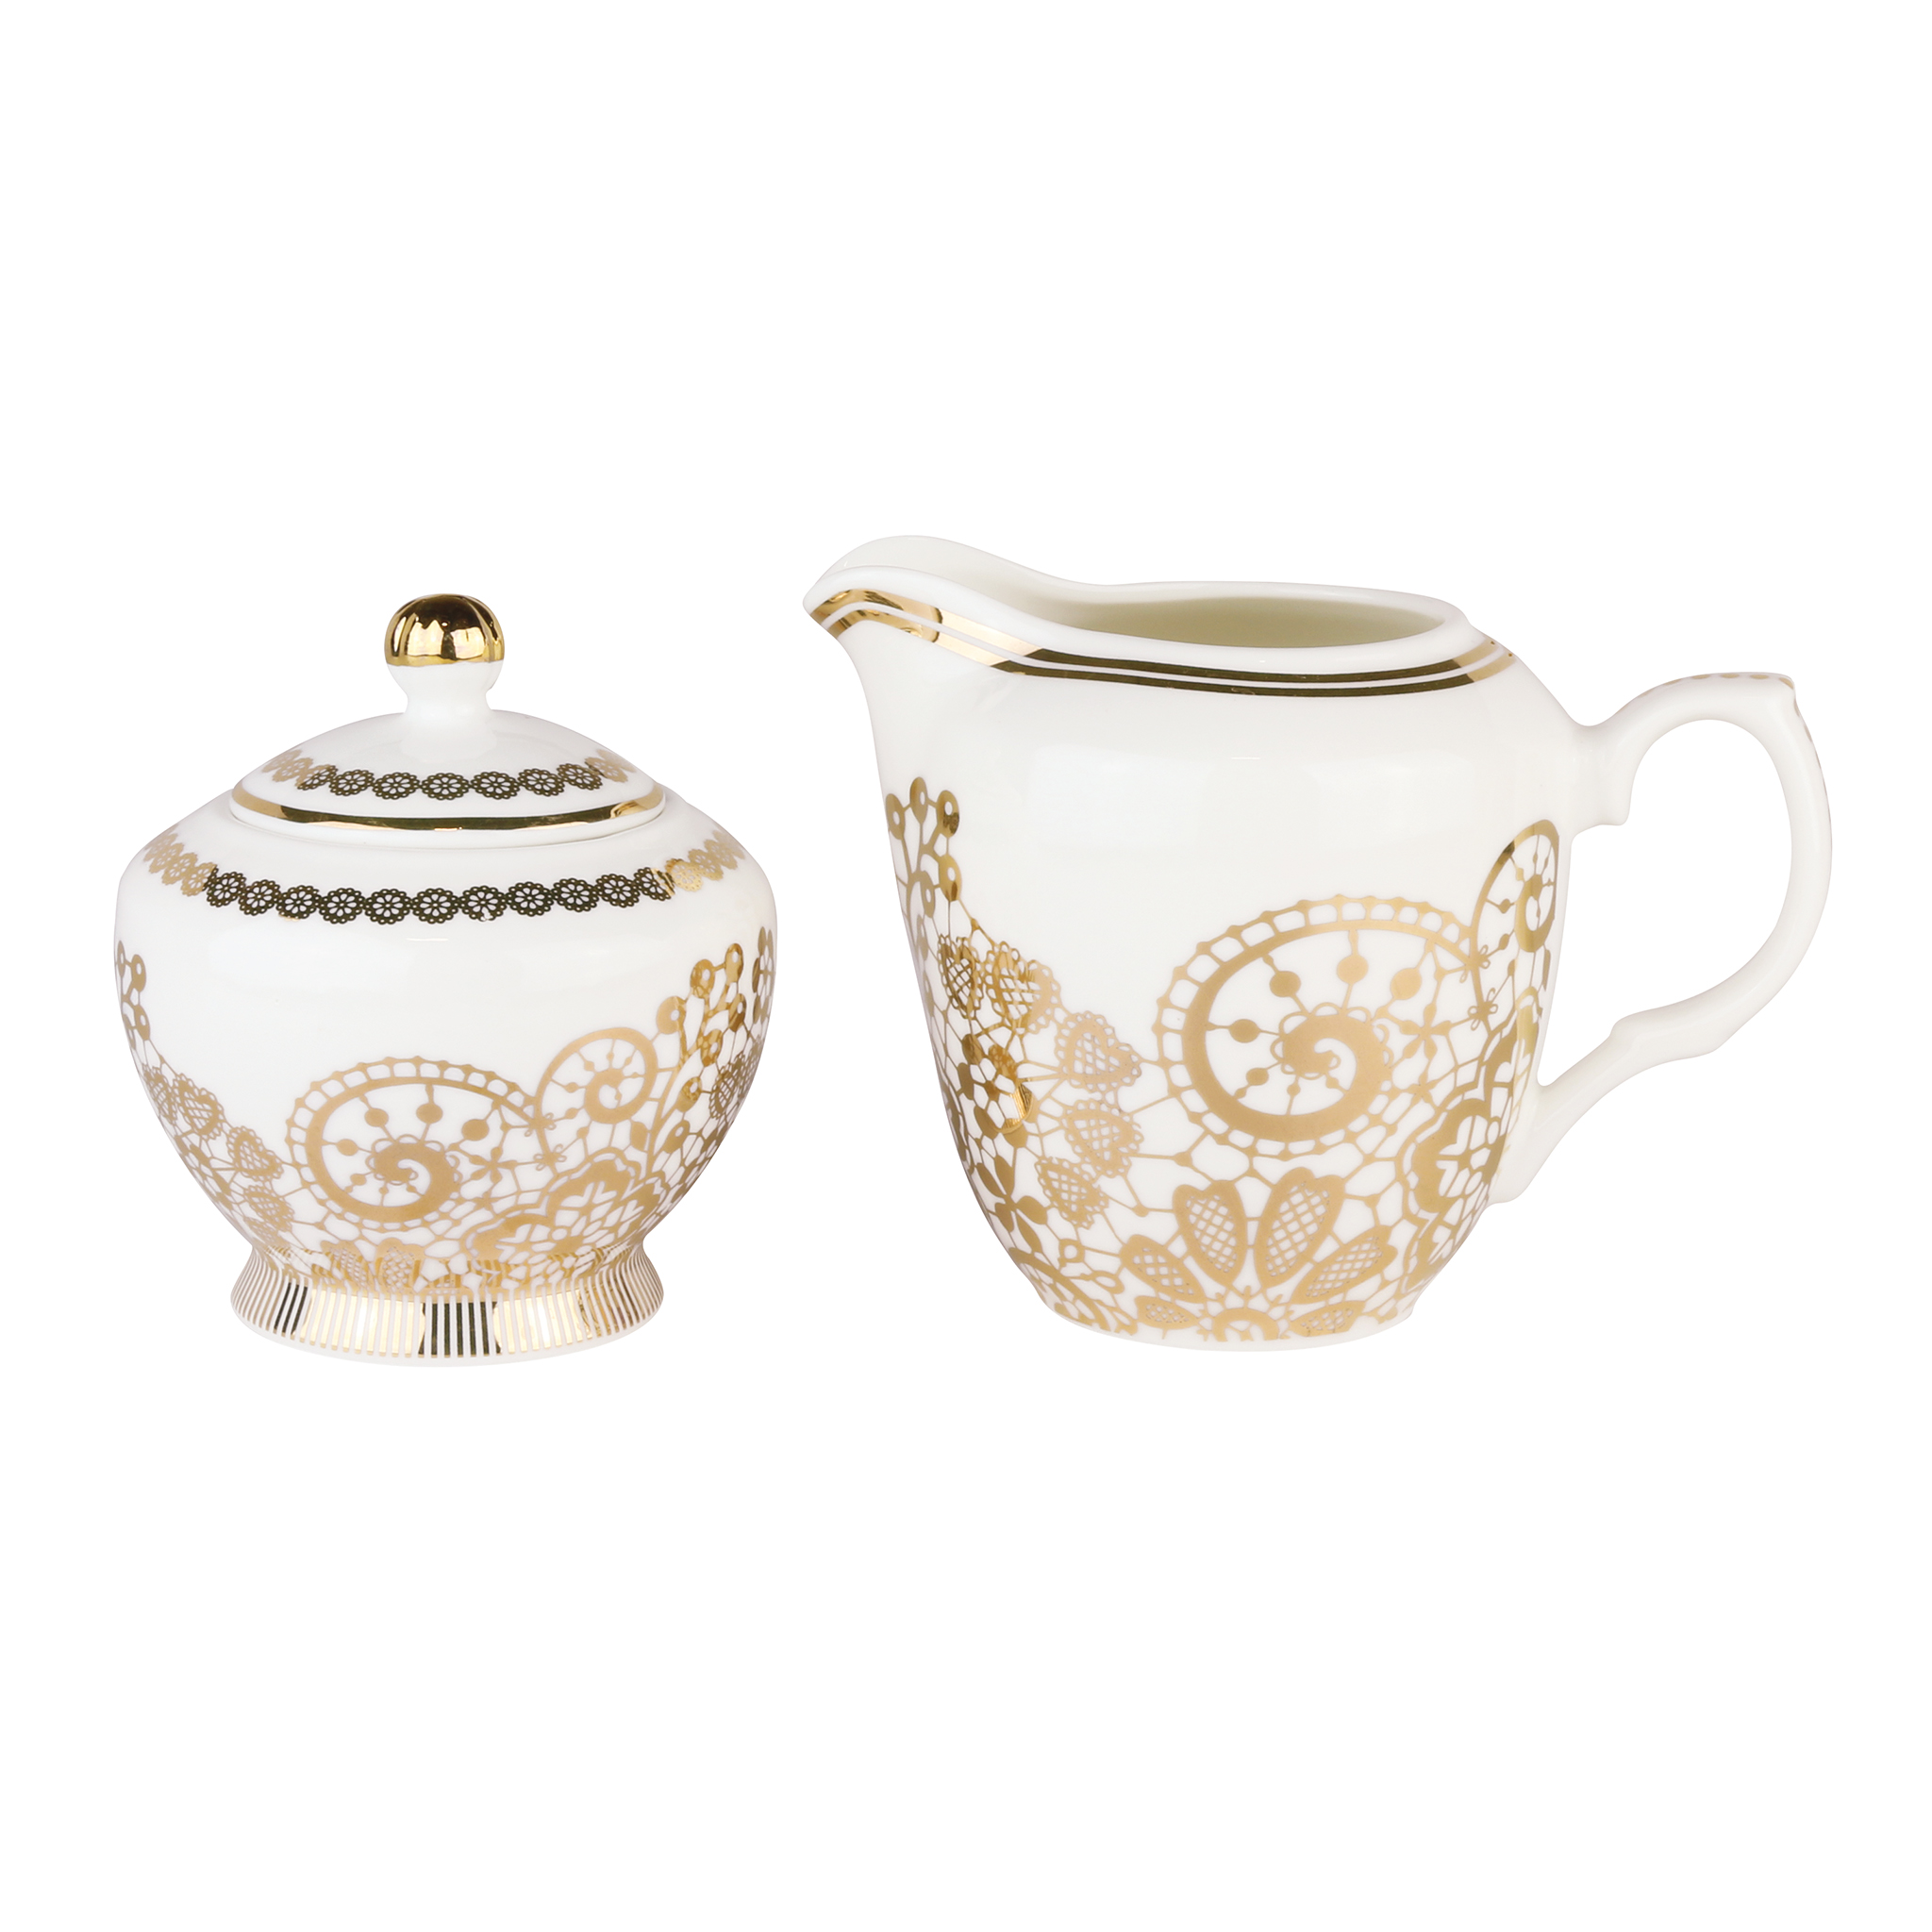 Gold Lace Porcelain Creamer and Sugar